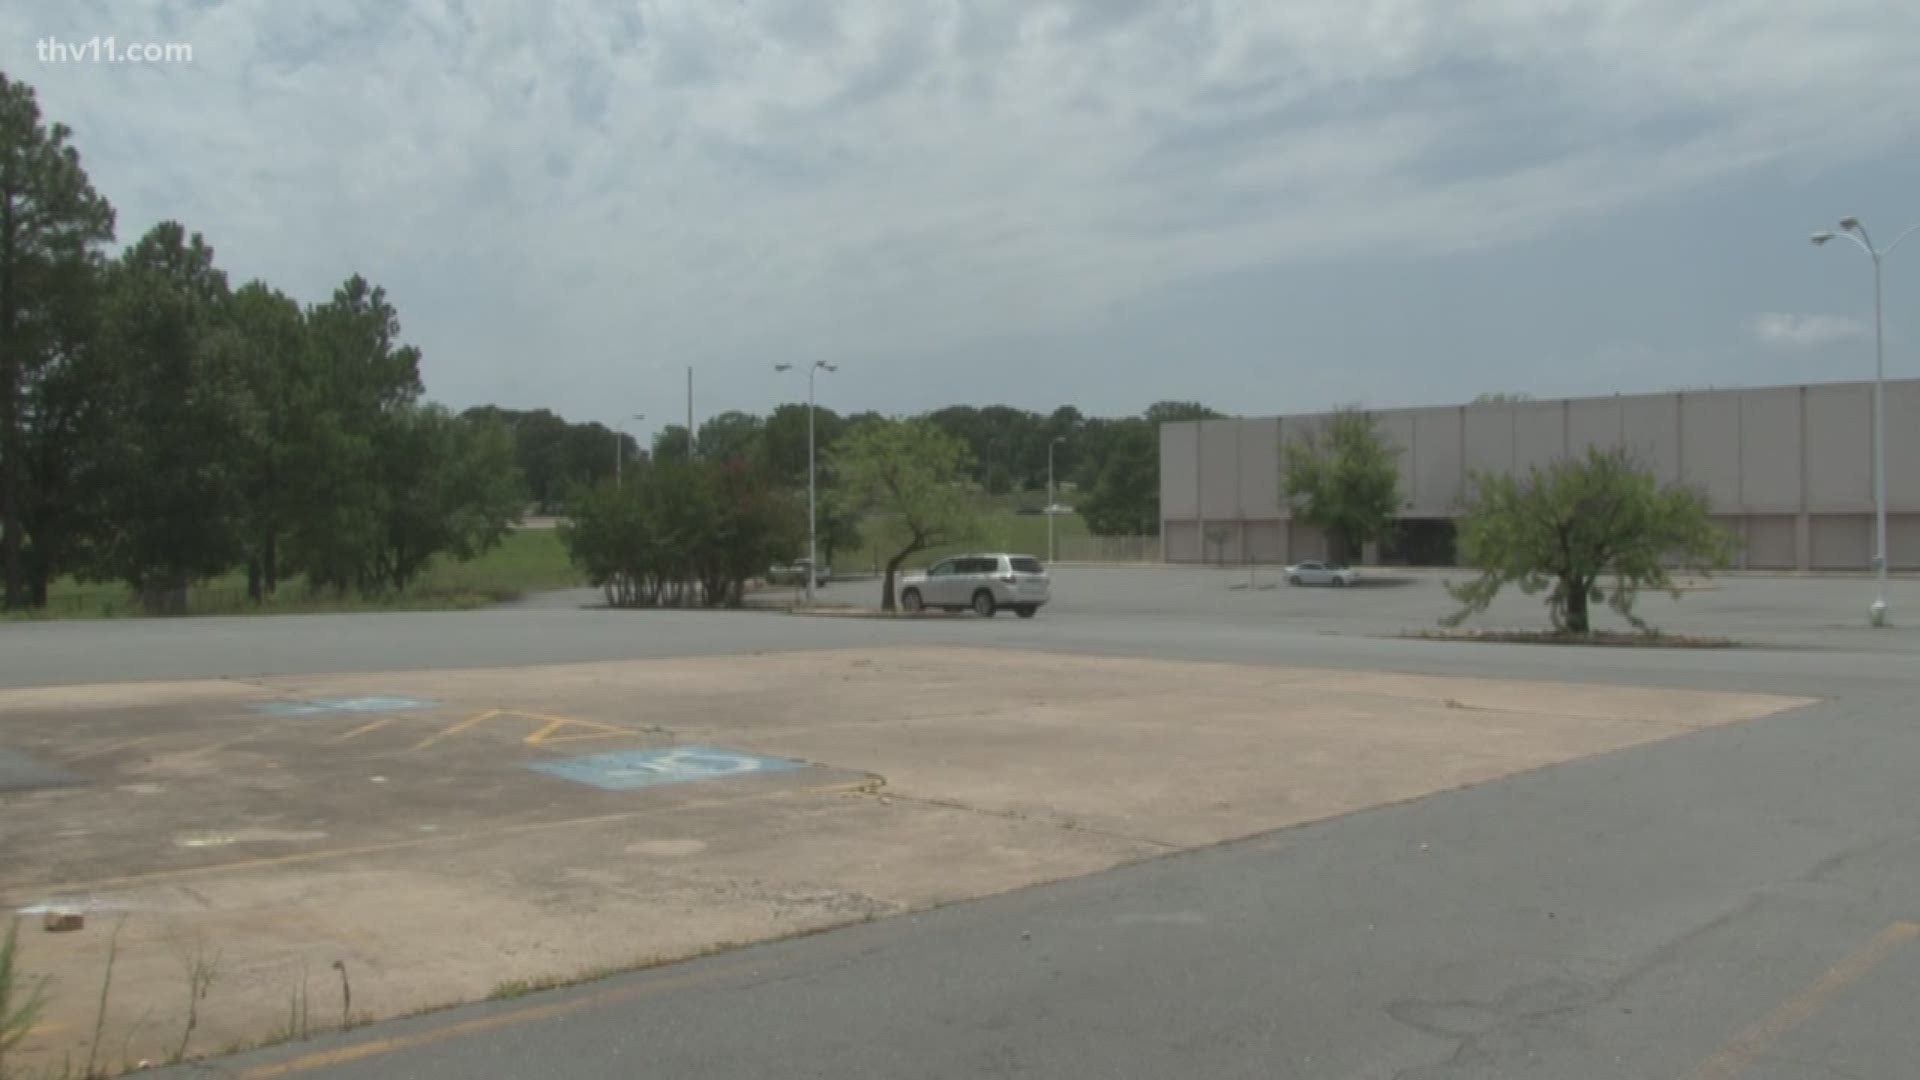 The city approved a multi-million dollar project to redevelop the area where Sears used to be in midtown.